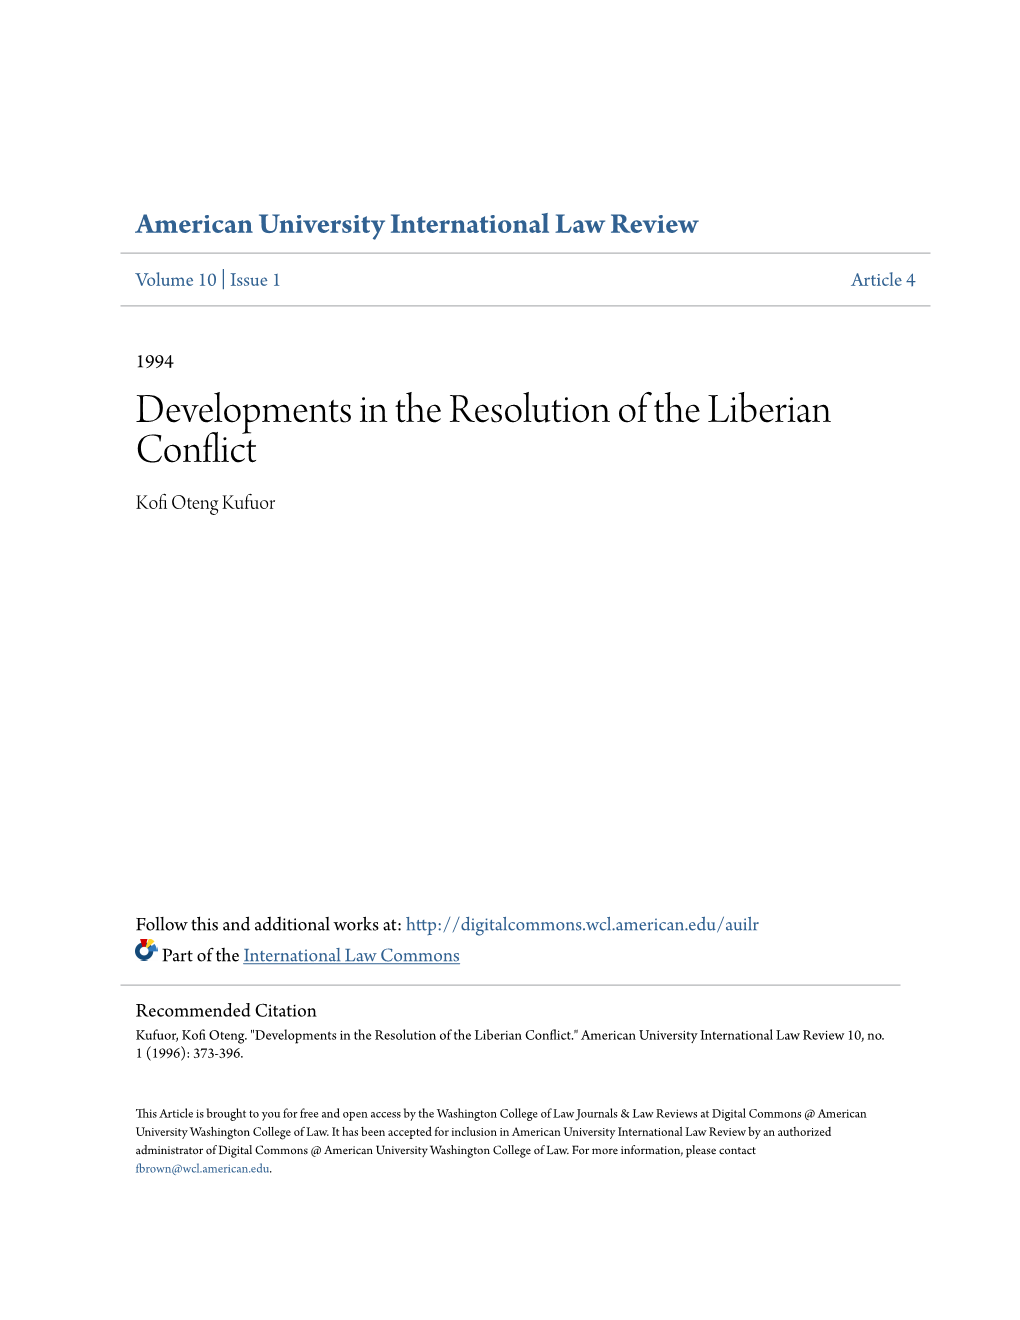 Developments in the Resolution of the Liberian Conflict Kofi Oteng Kufuor